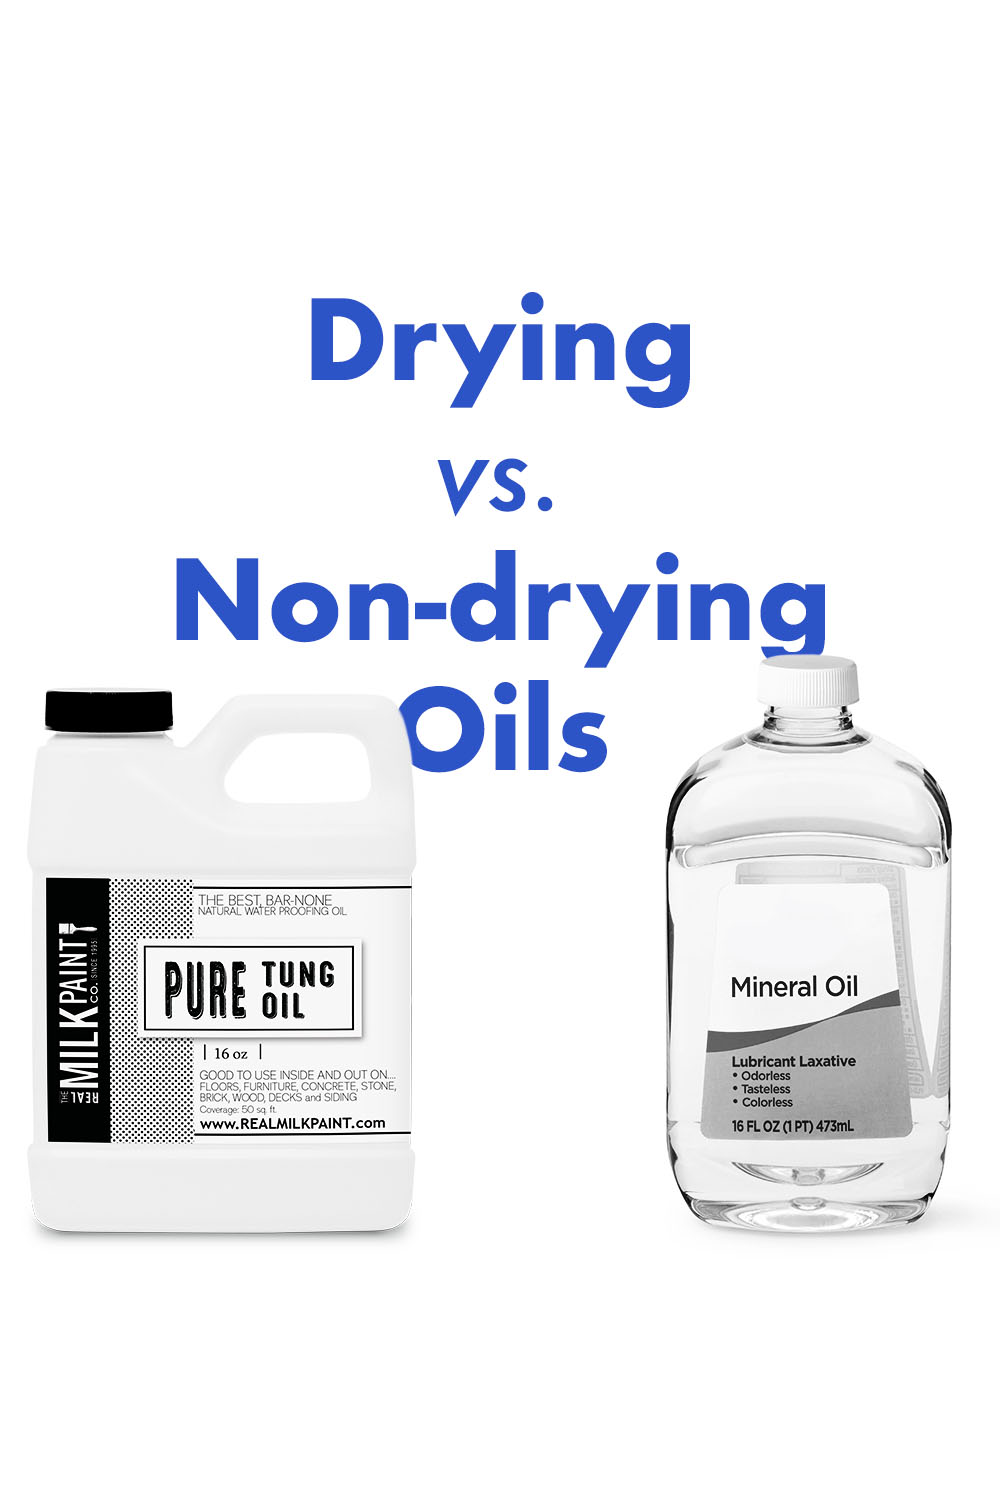 What are drying oils?